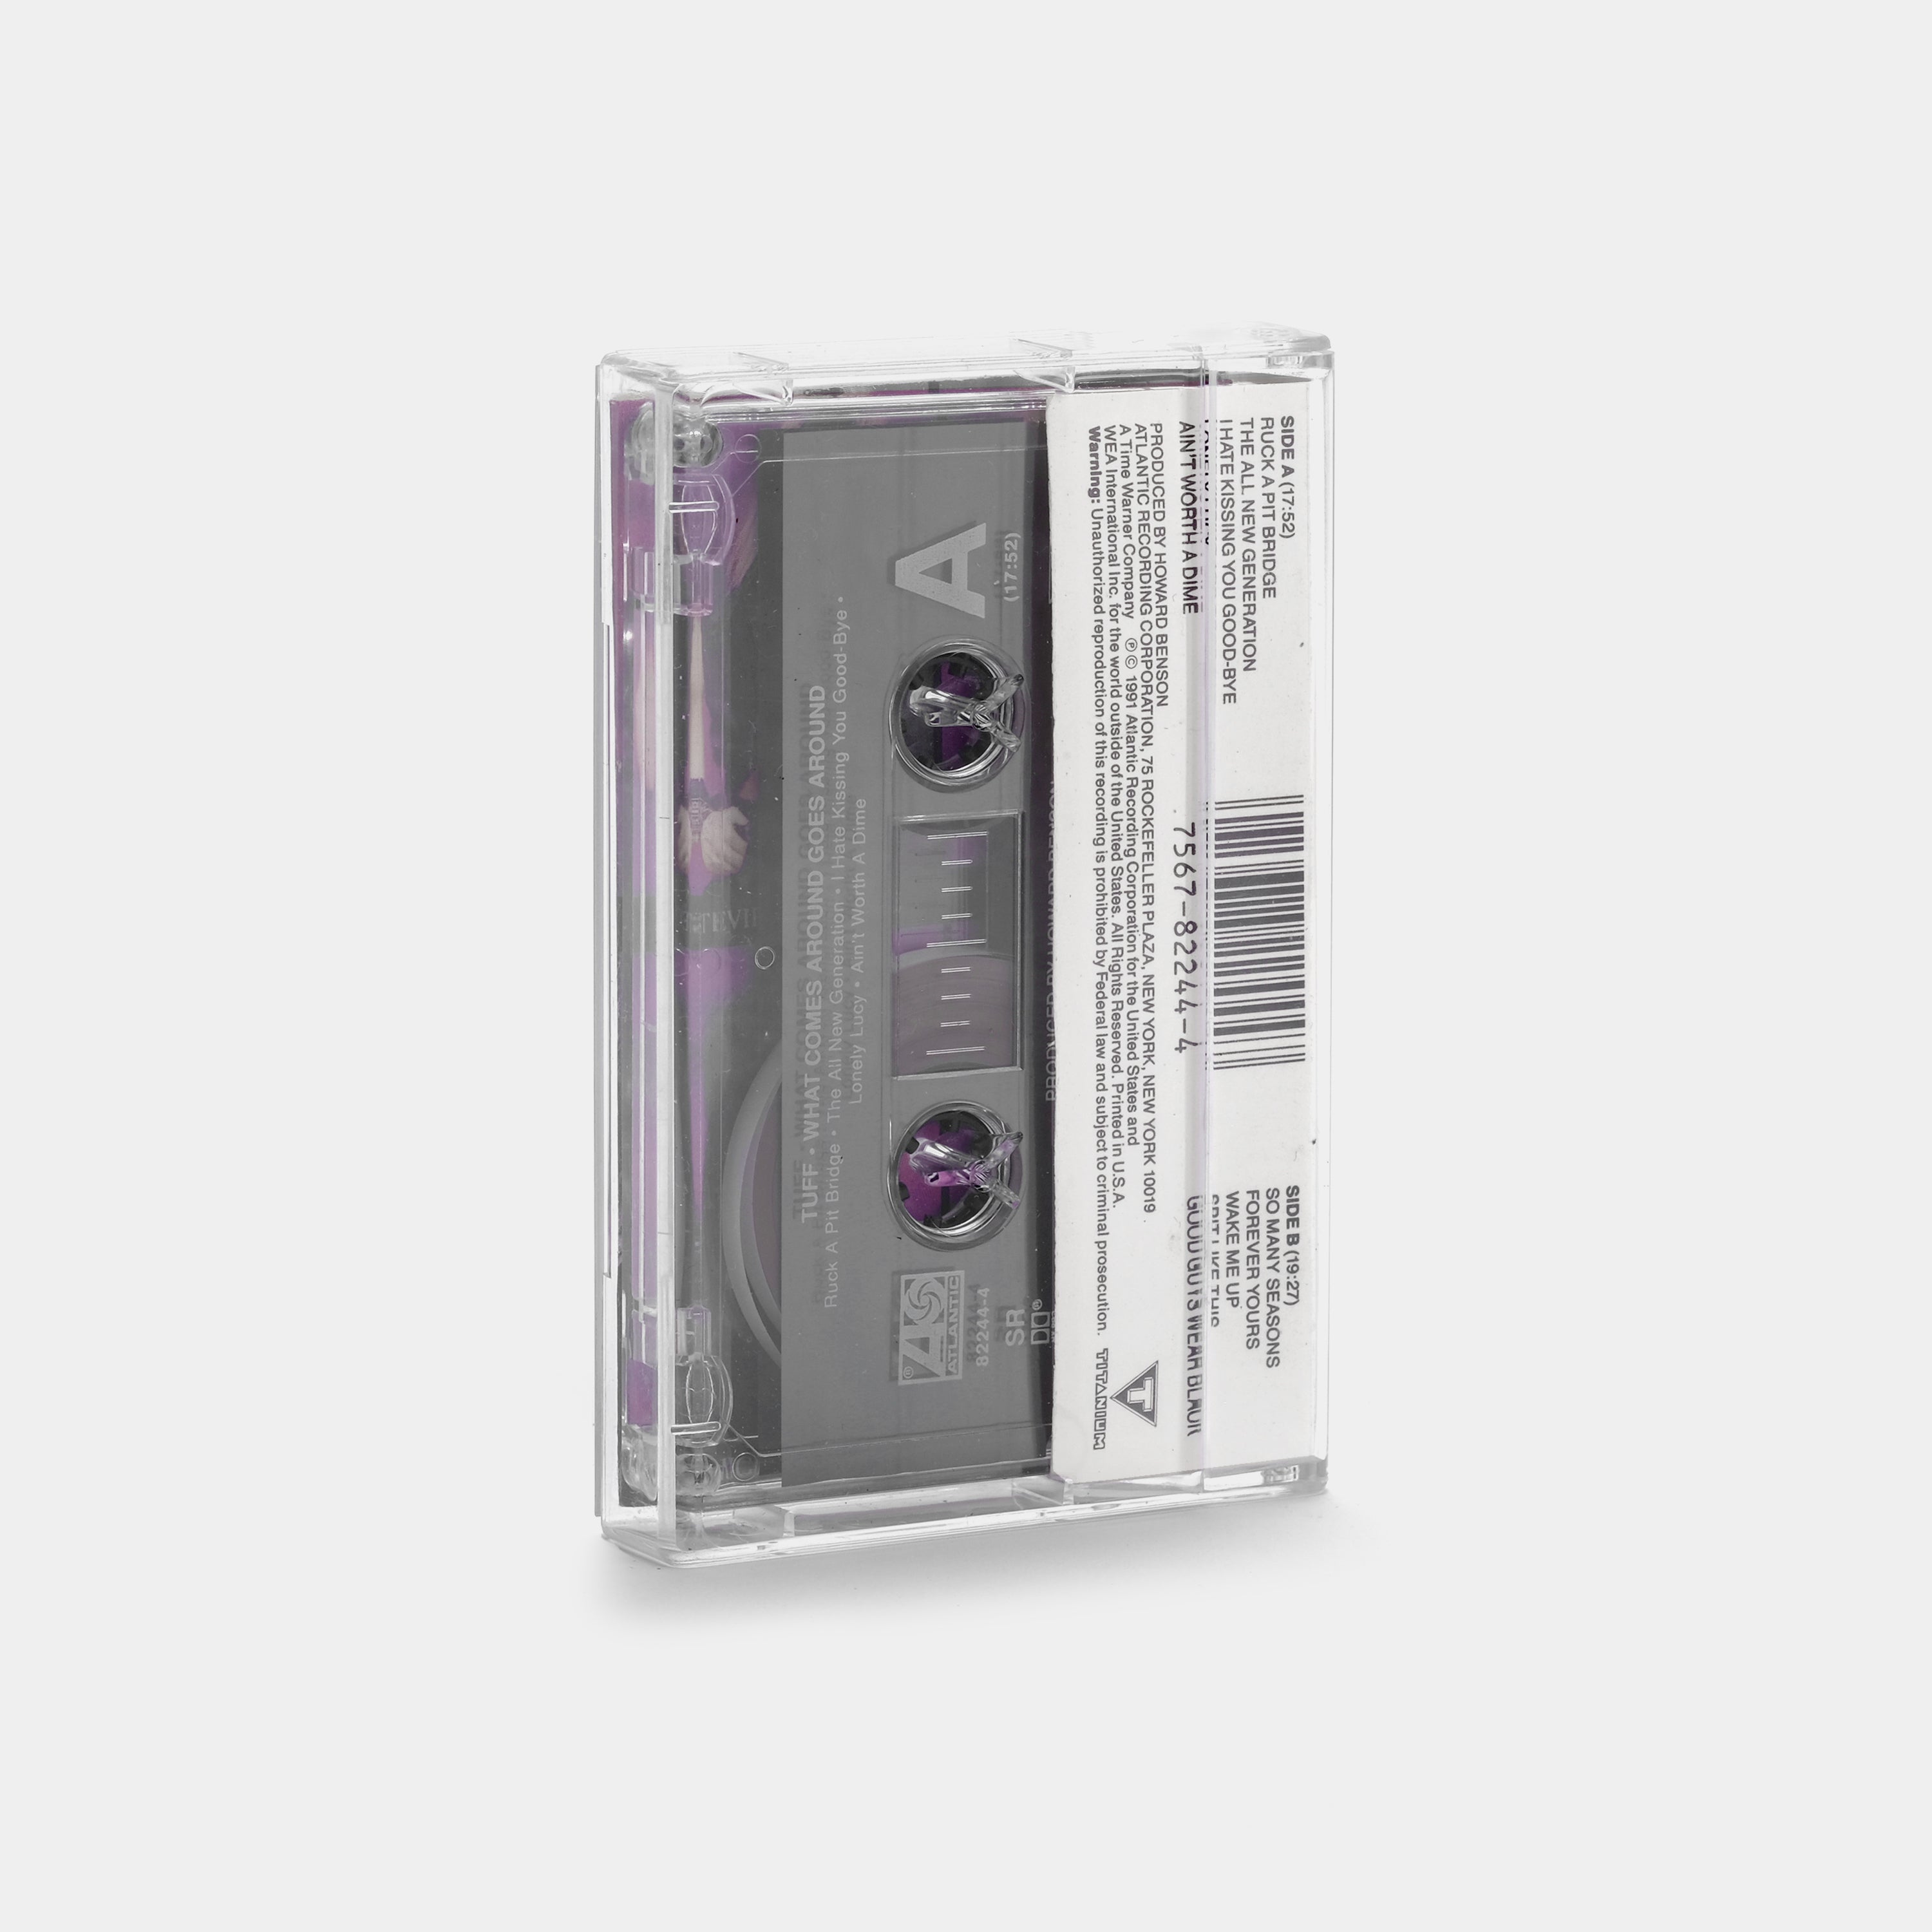 Tuff - What Comes Around Goes Around Cassette Tape